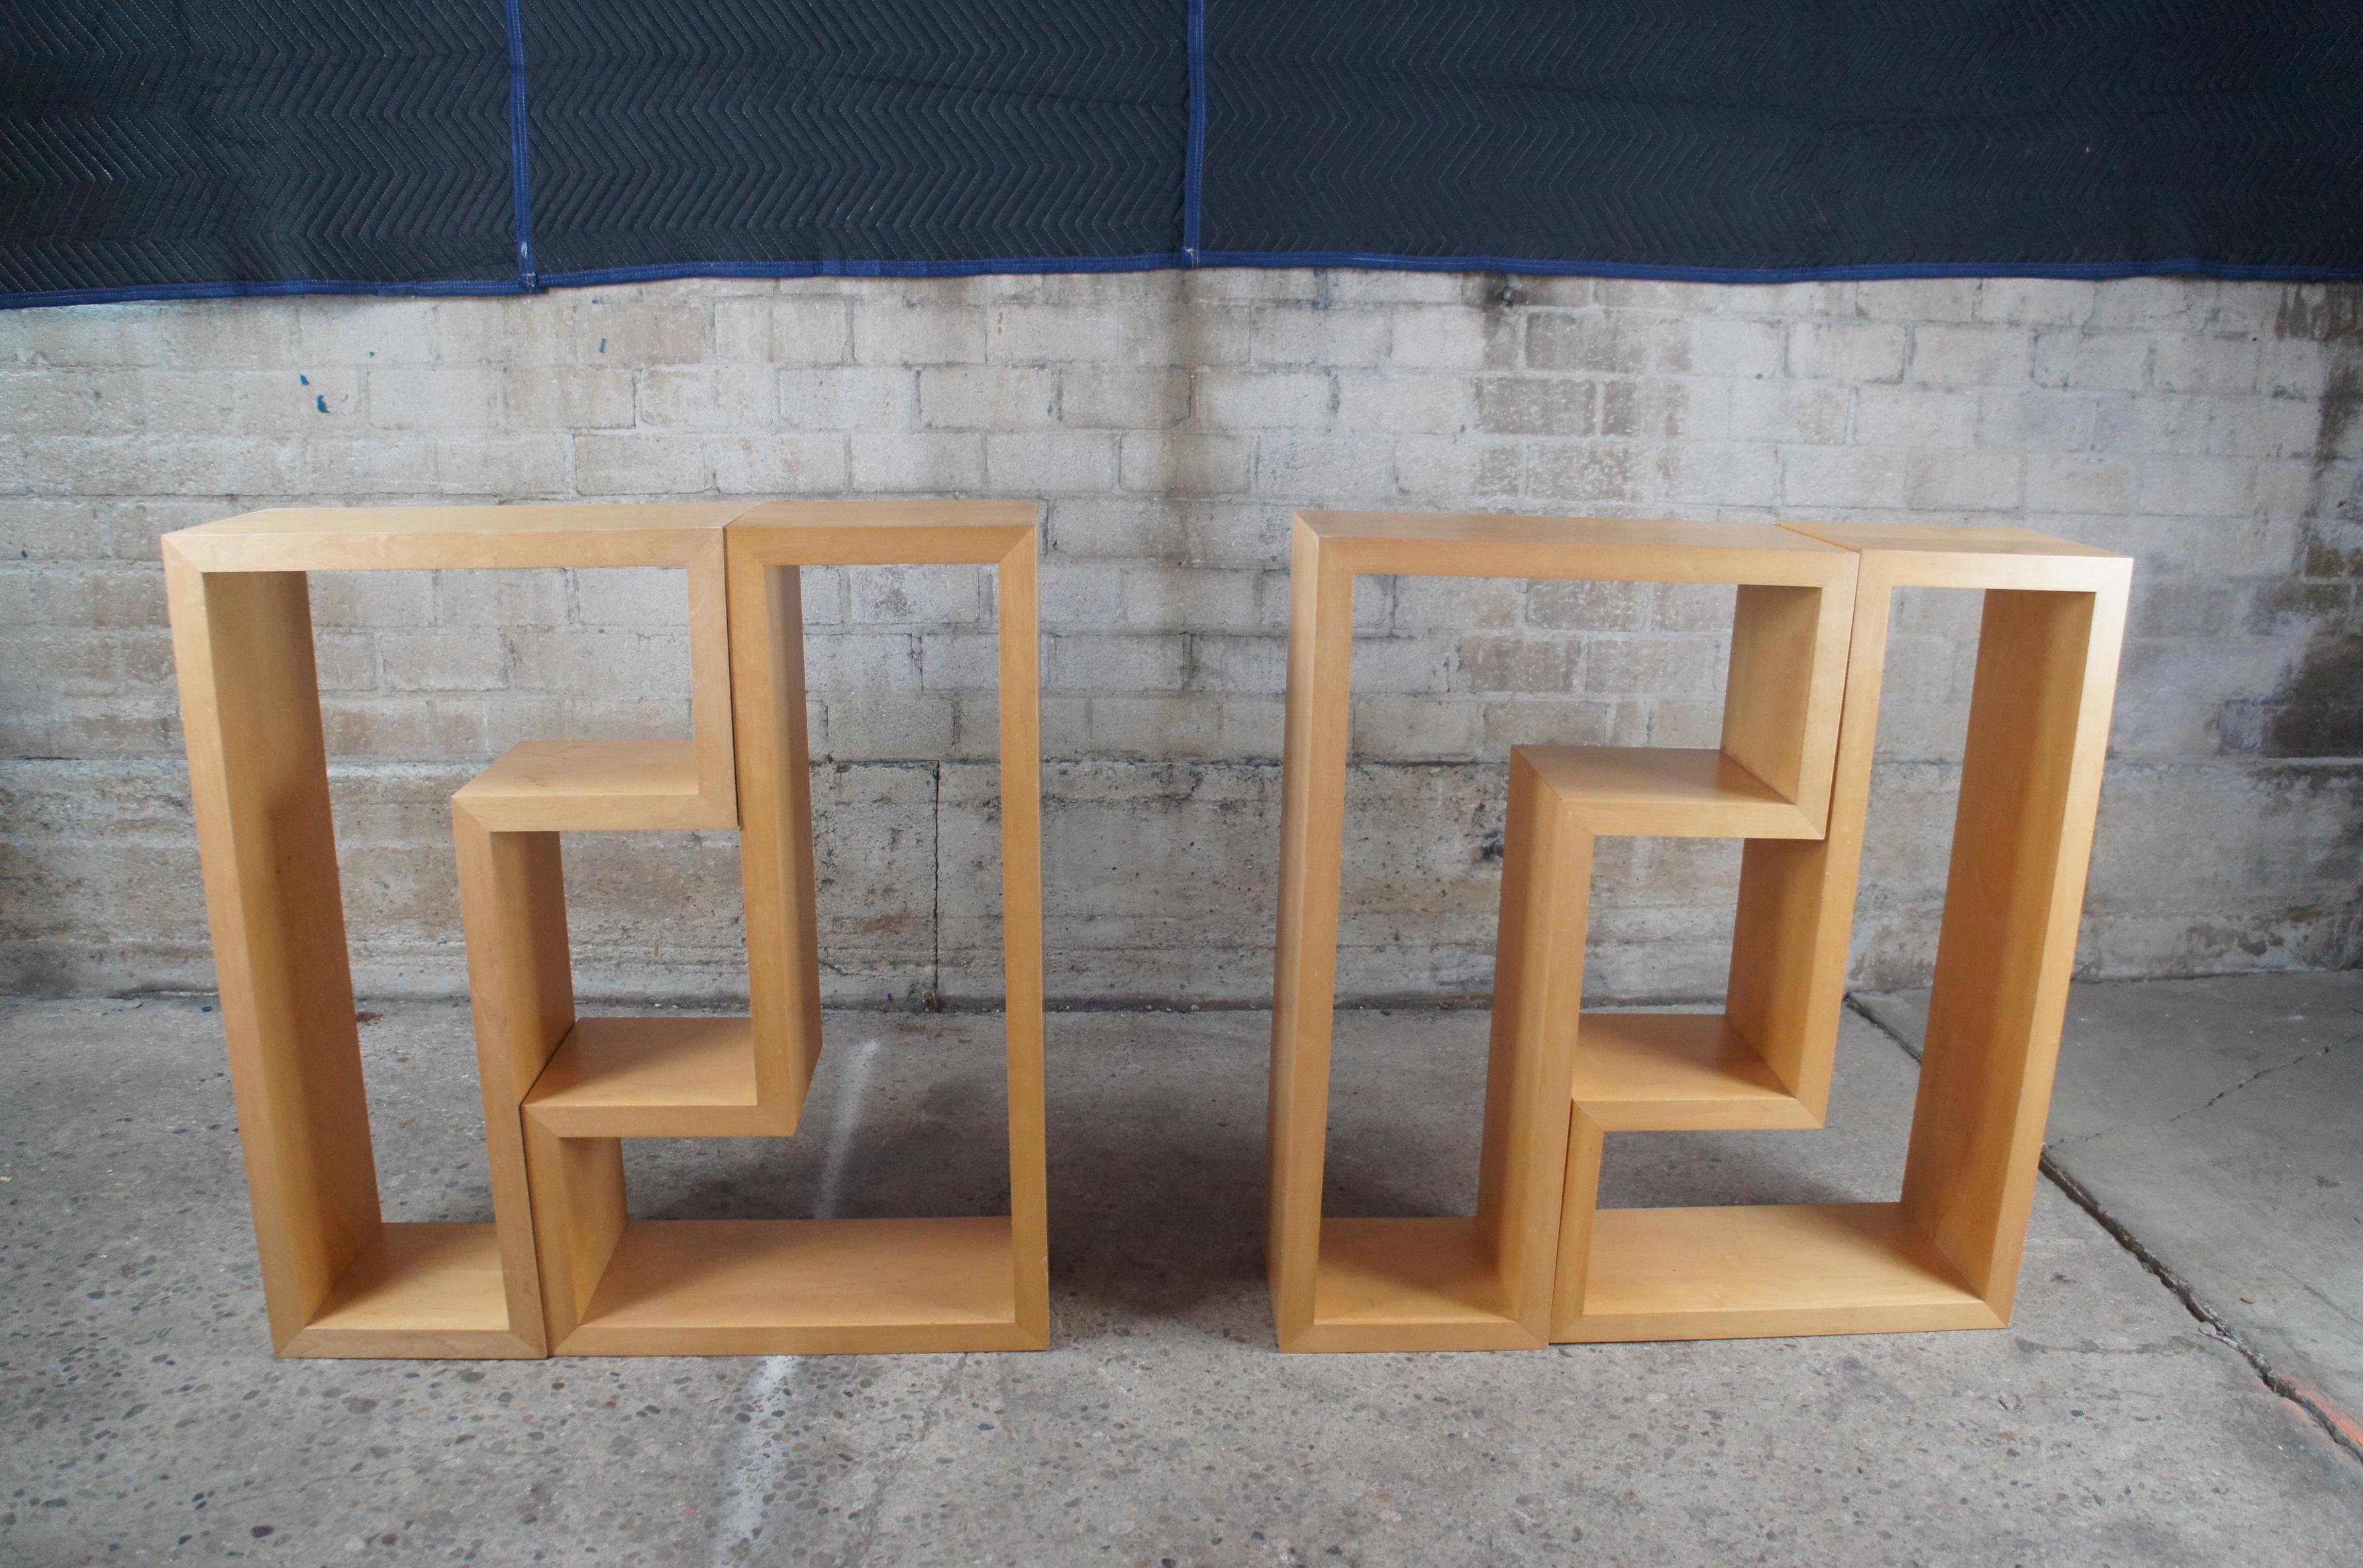 2 Mid-Century Modern Geometric Modular Maple Shelving Bookcases Console Etagere For Sale 1